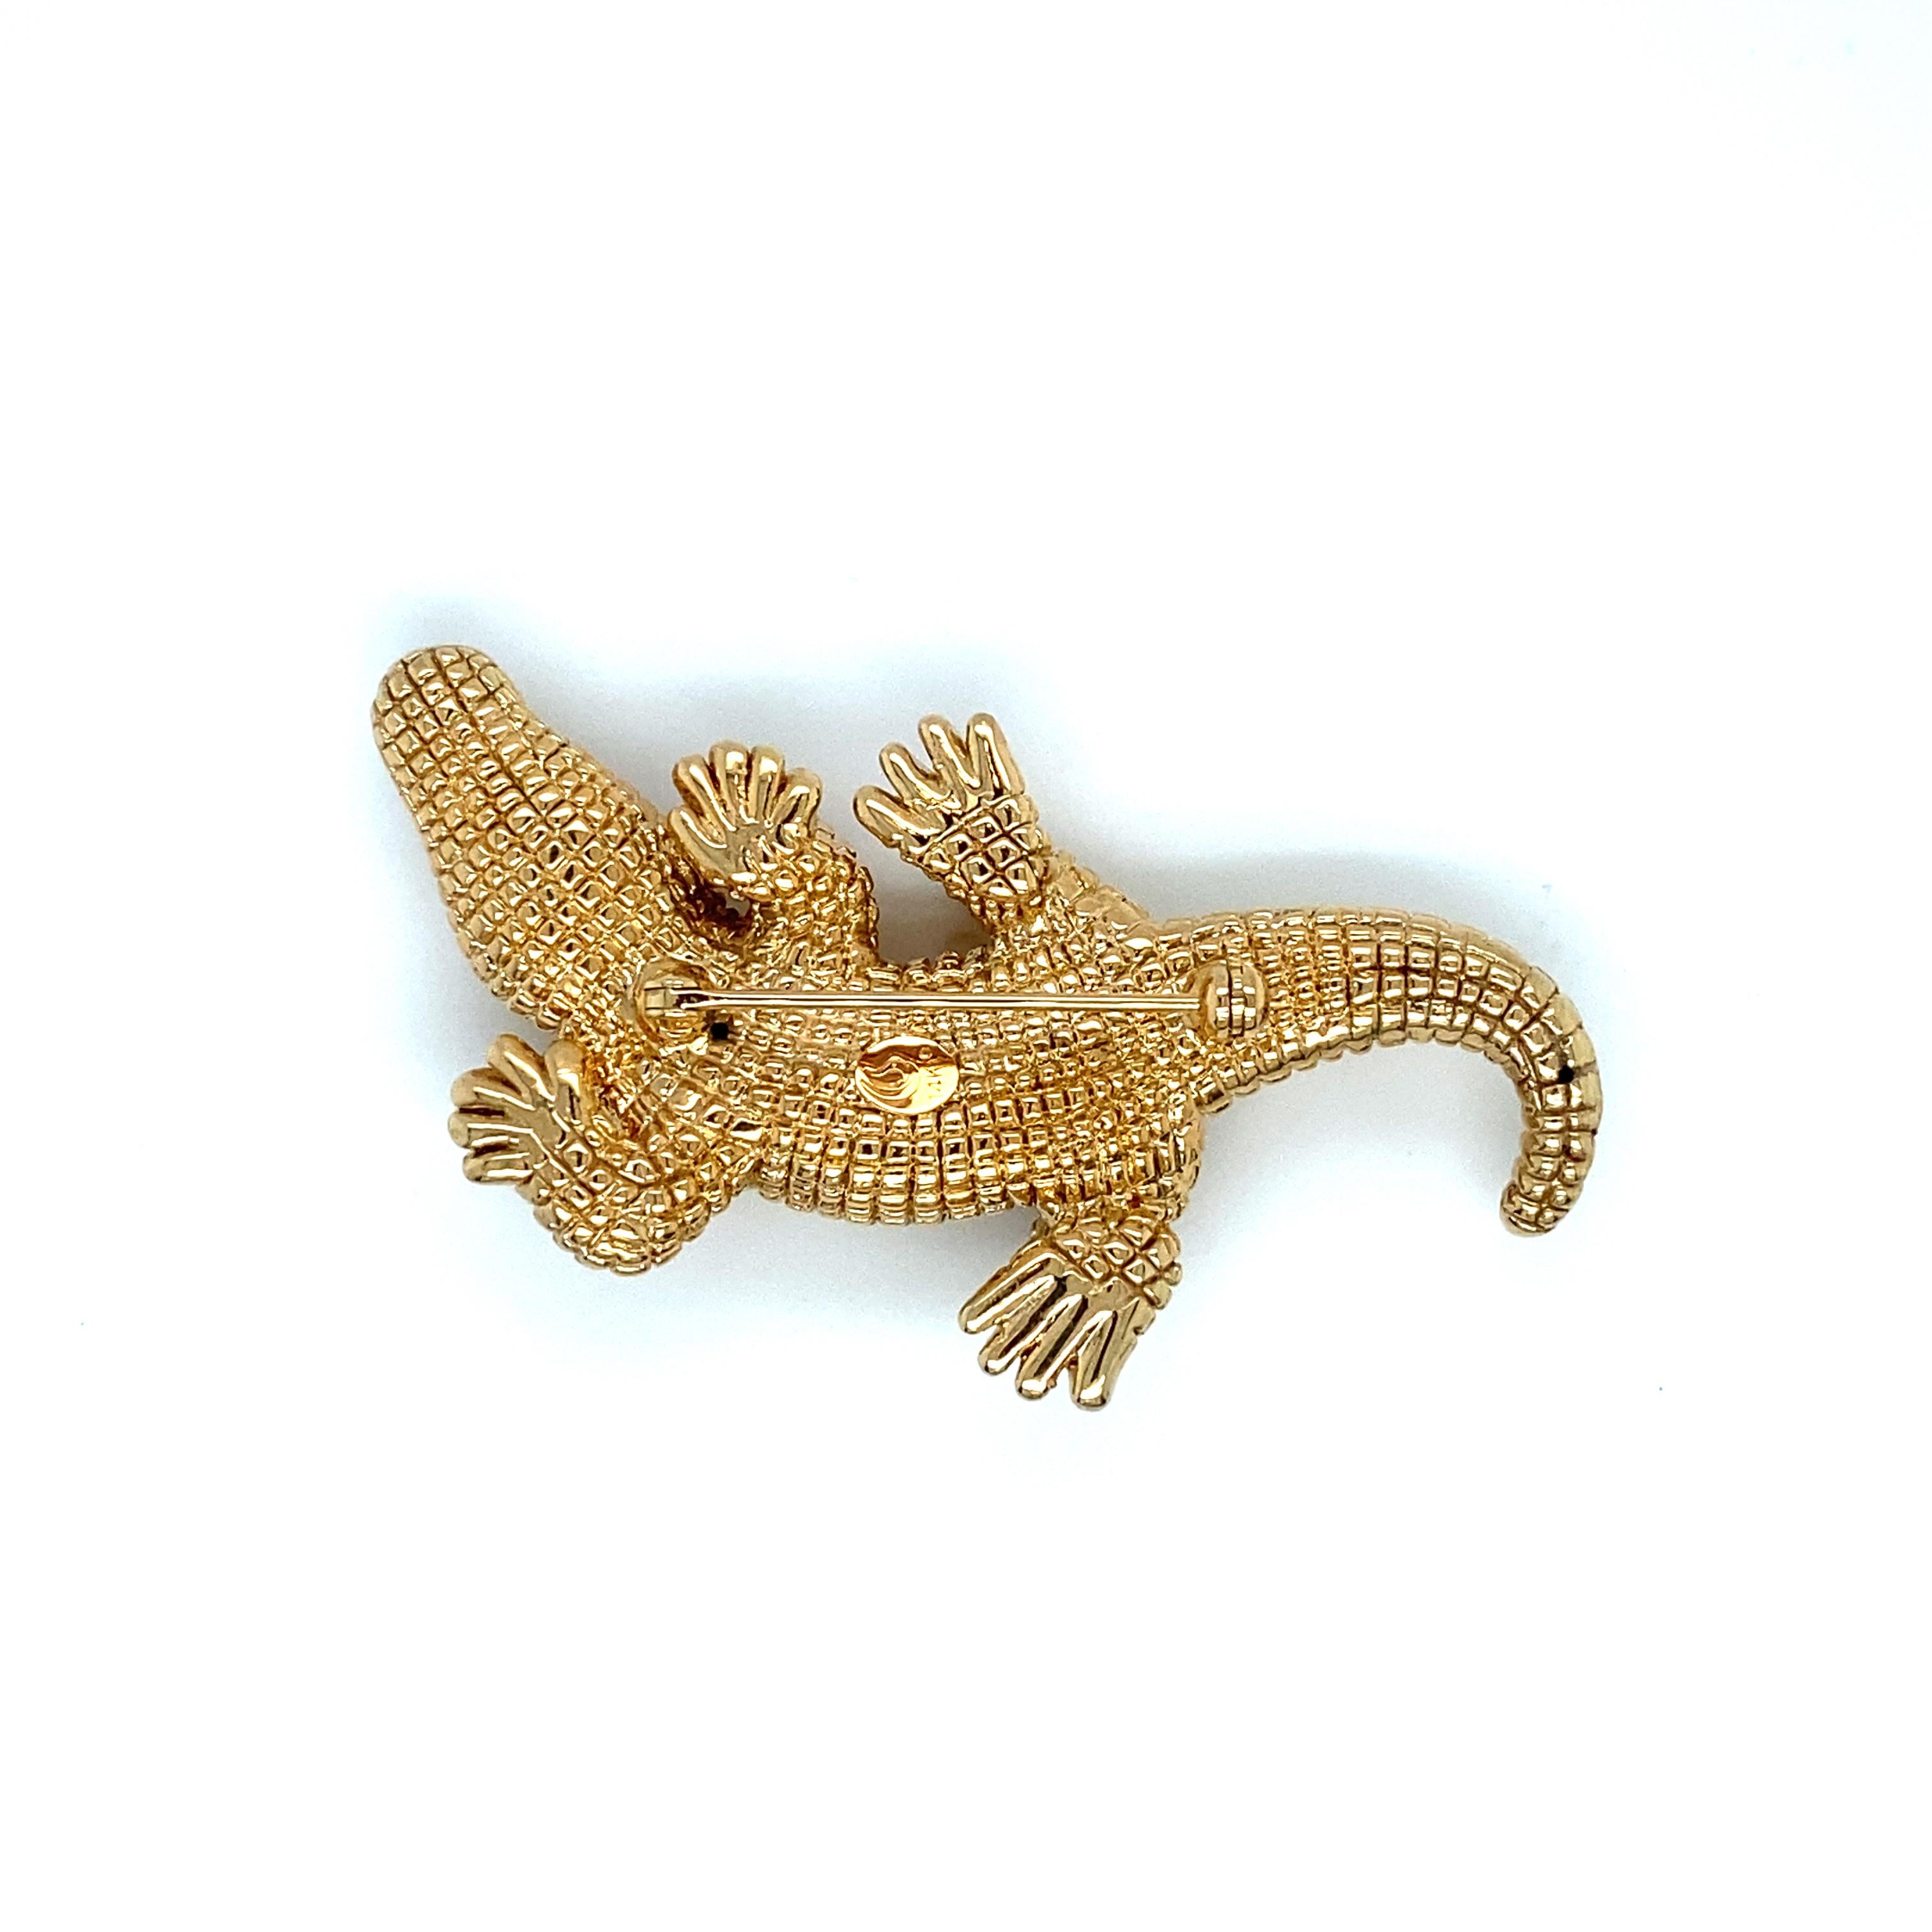 Item Details: This unique alligator brooch features exquisite detail in its craft and construction. The scales of the alligator are beautifully sculpted in 14 karat yellow gold. This brooch makes a wonderful gift for an animal lover!

Circa: